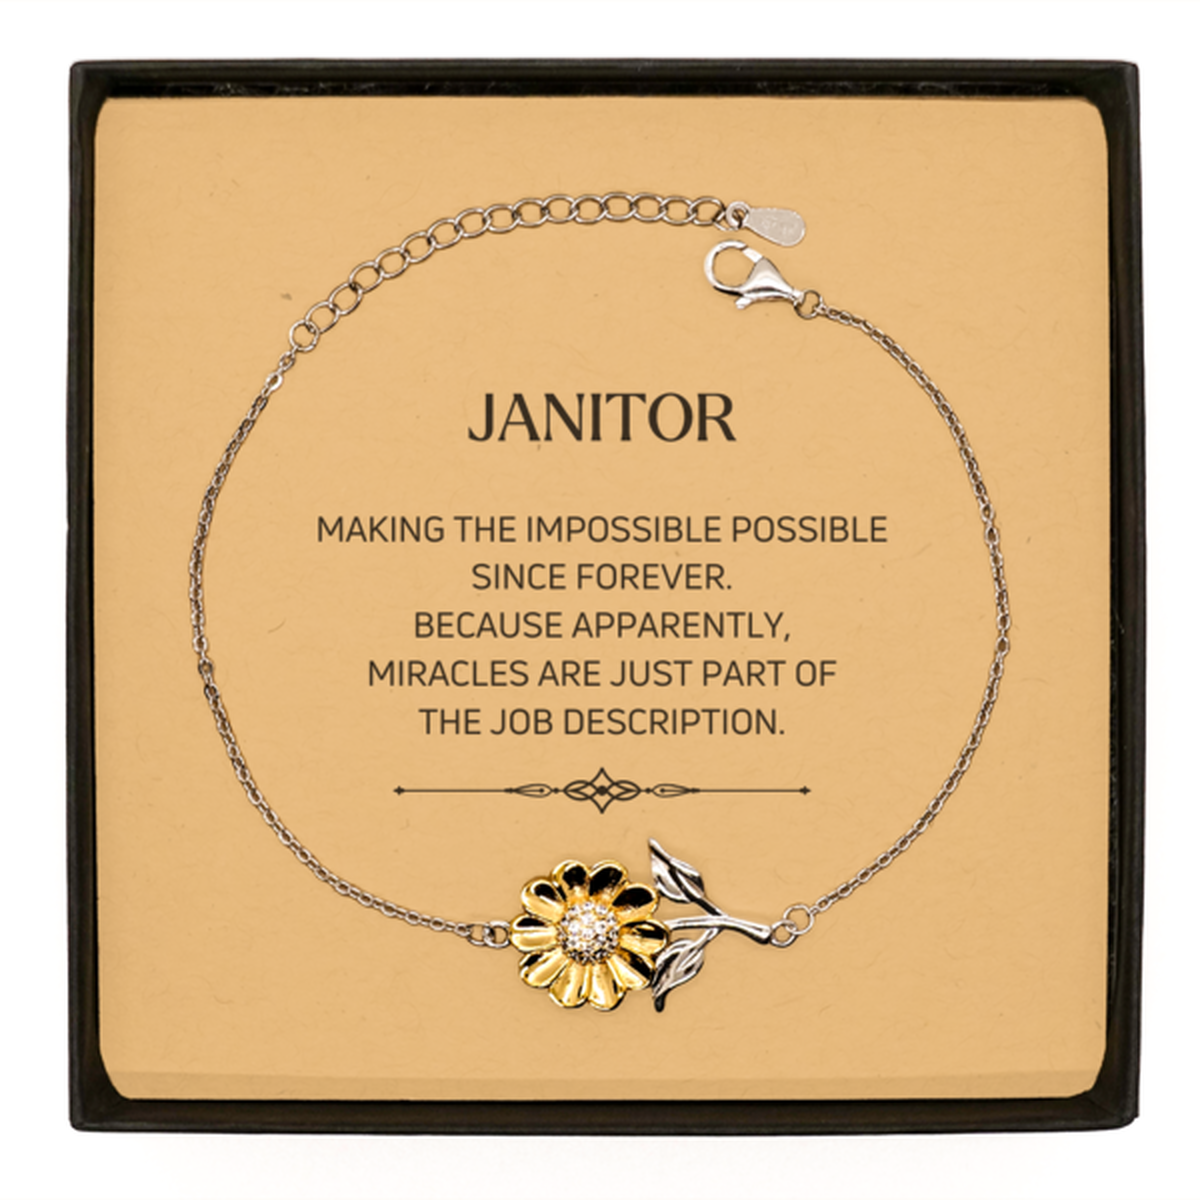 Funny Janitor Gifts, Miracles are just part of the job description, Inspirational Birthday Sunflower Bracelet For Janitor, Men, Women, Coworkers, Friends, Boss